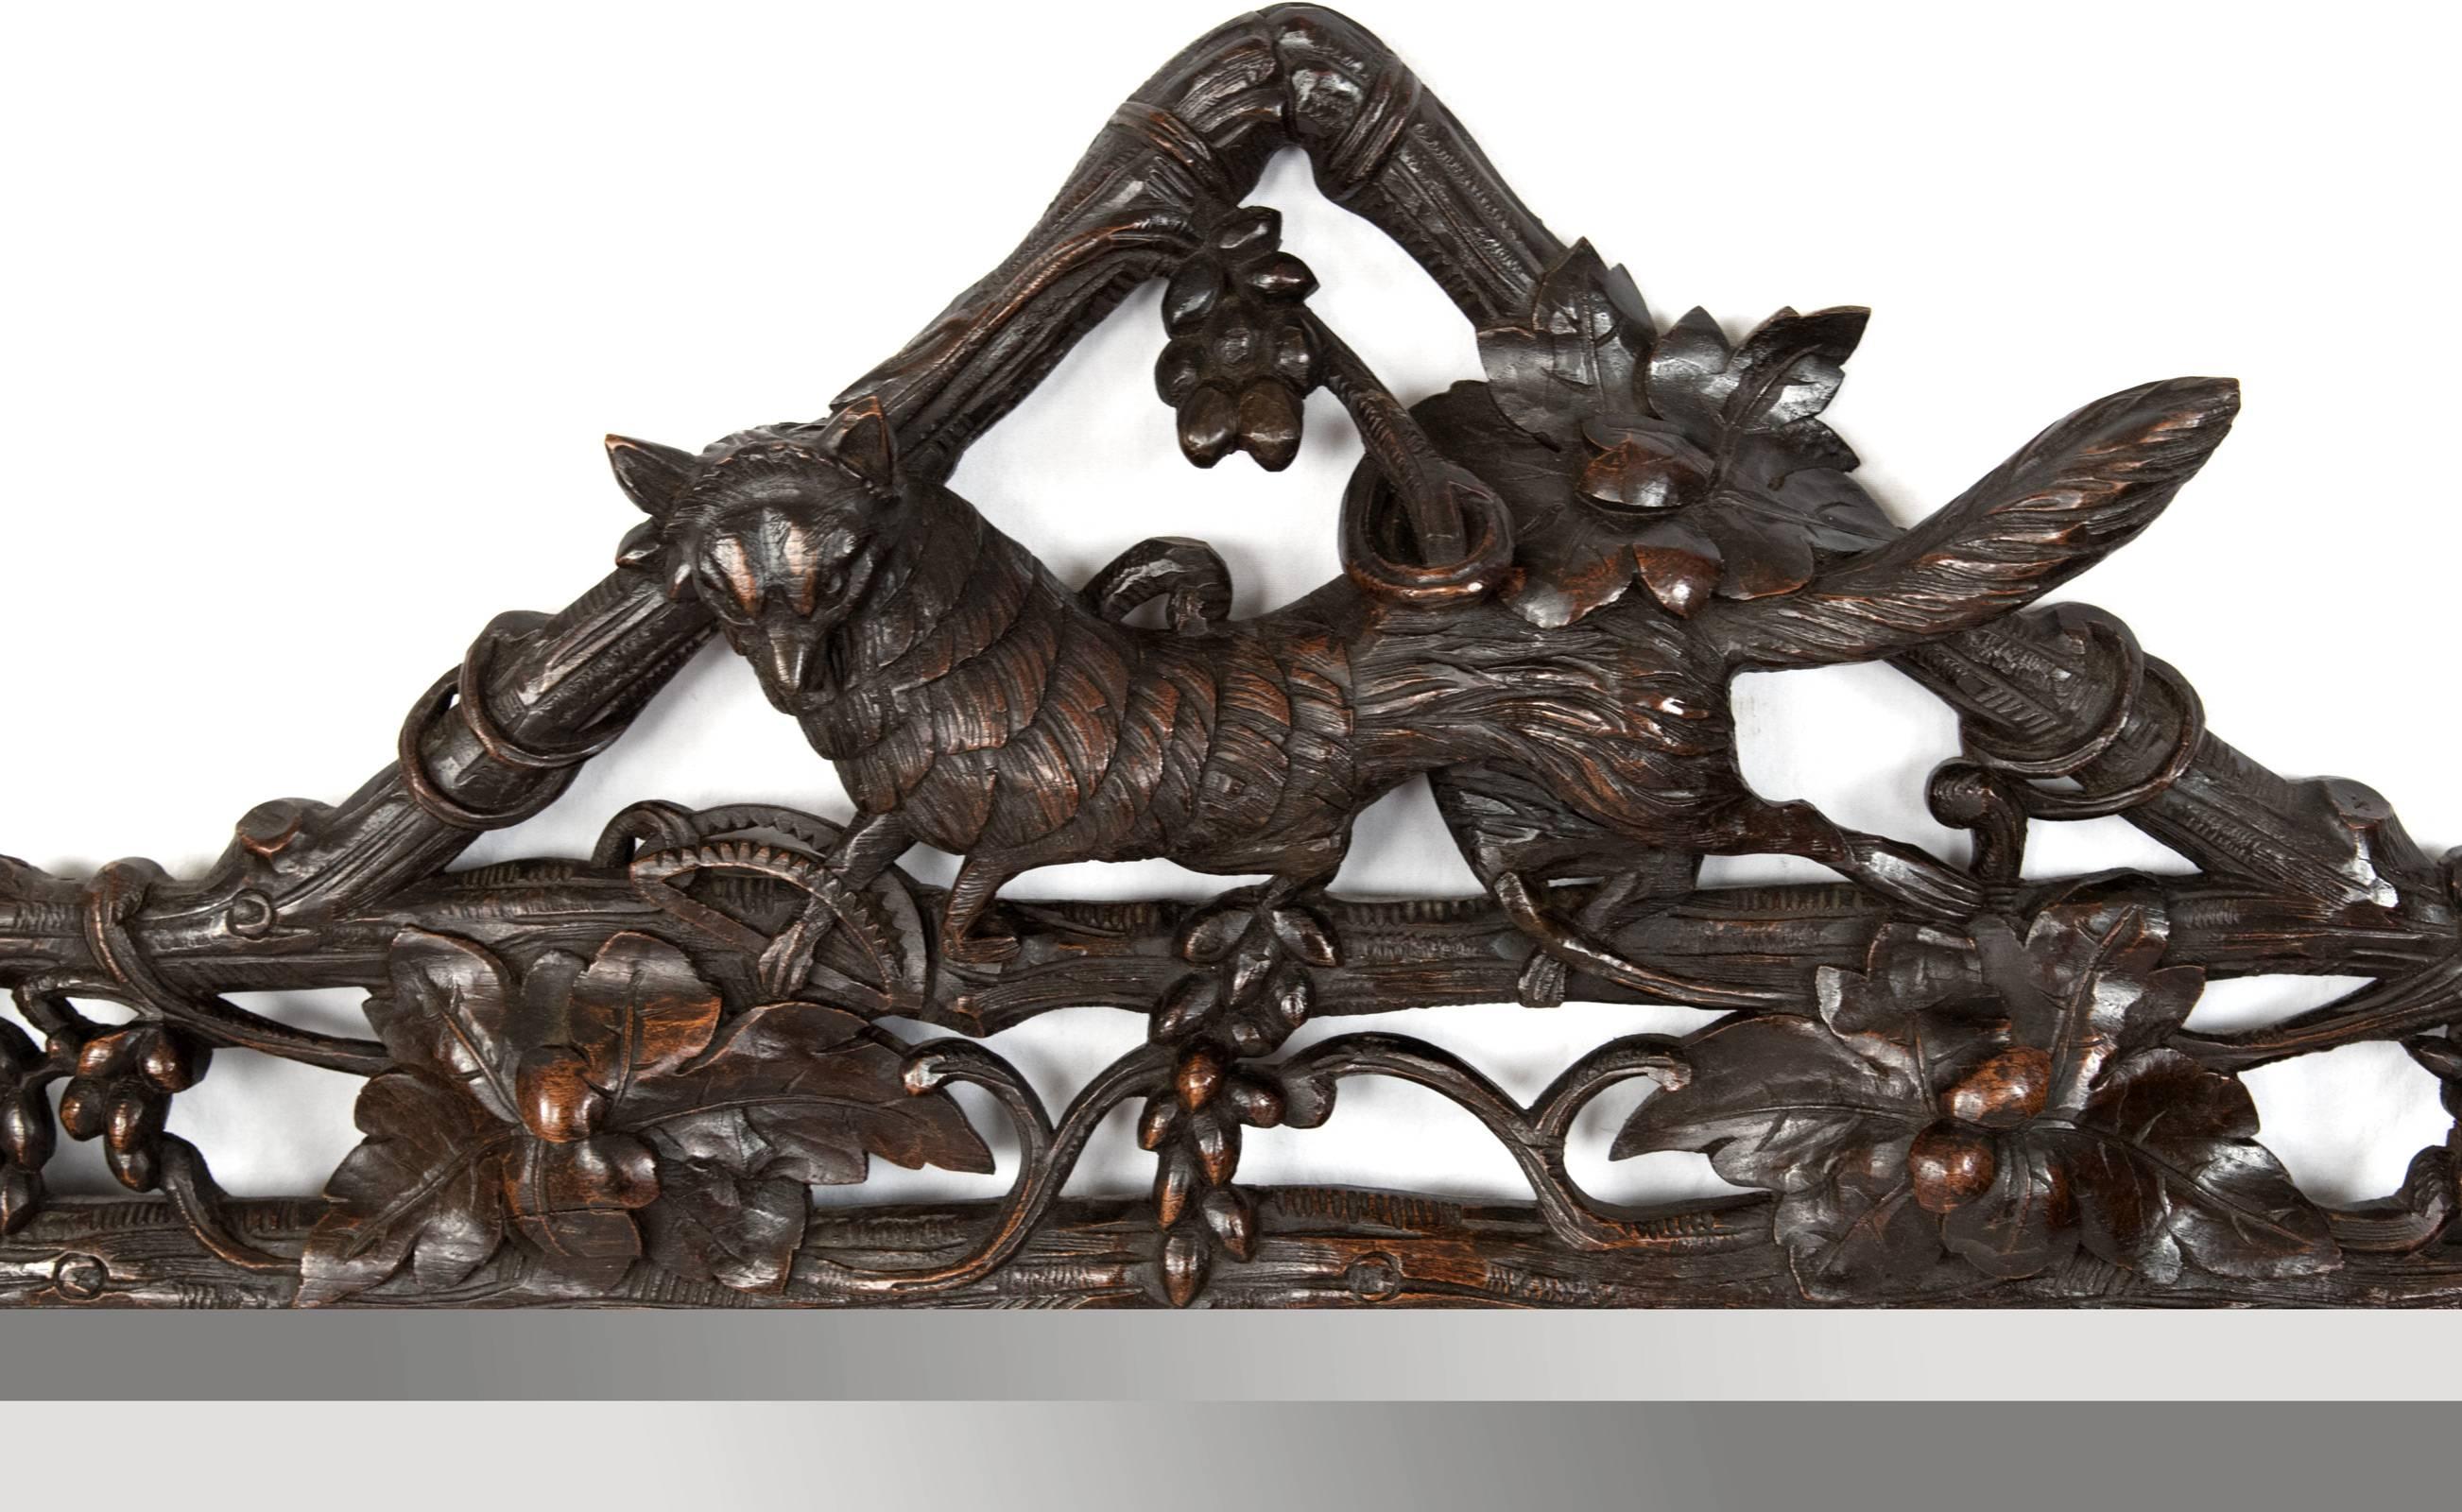 A hand-carved oak Black Forest mirror from the last quarter of the 19th century with a frame of carved twisting branches, leaves and foliage, crested with the form of an elongated fox.